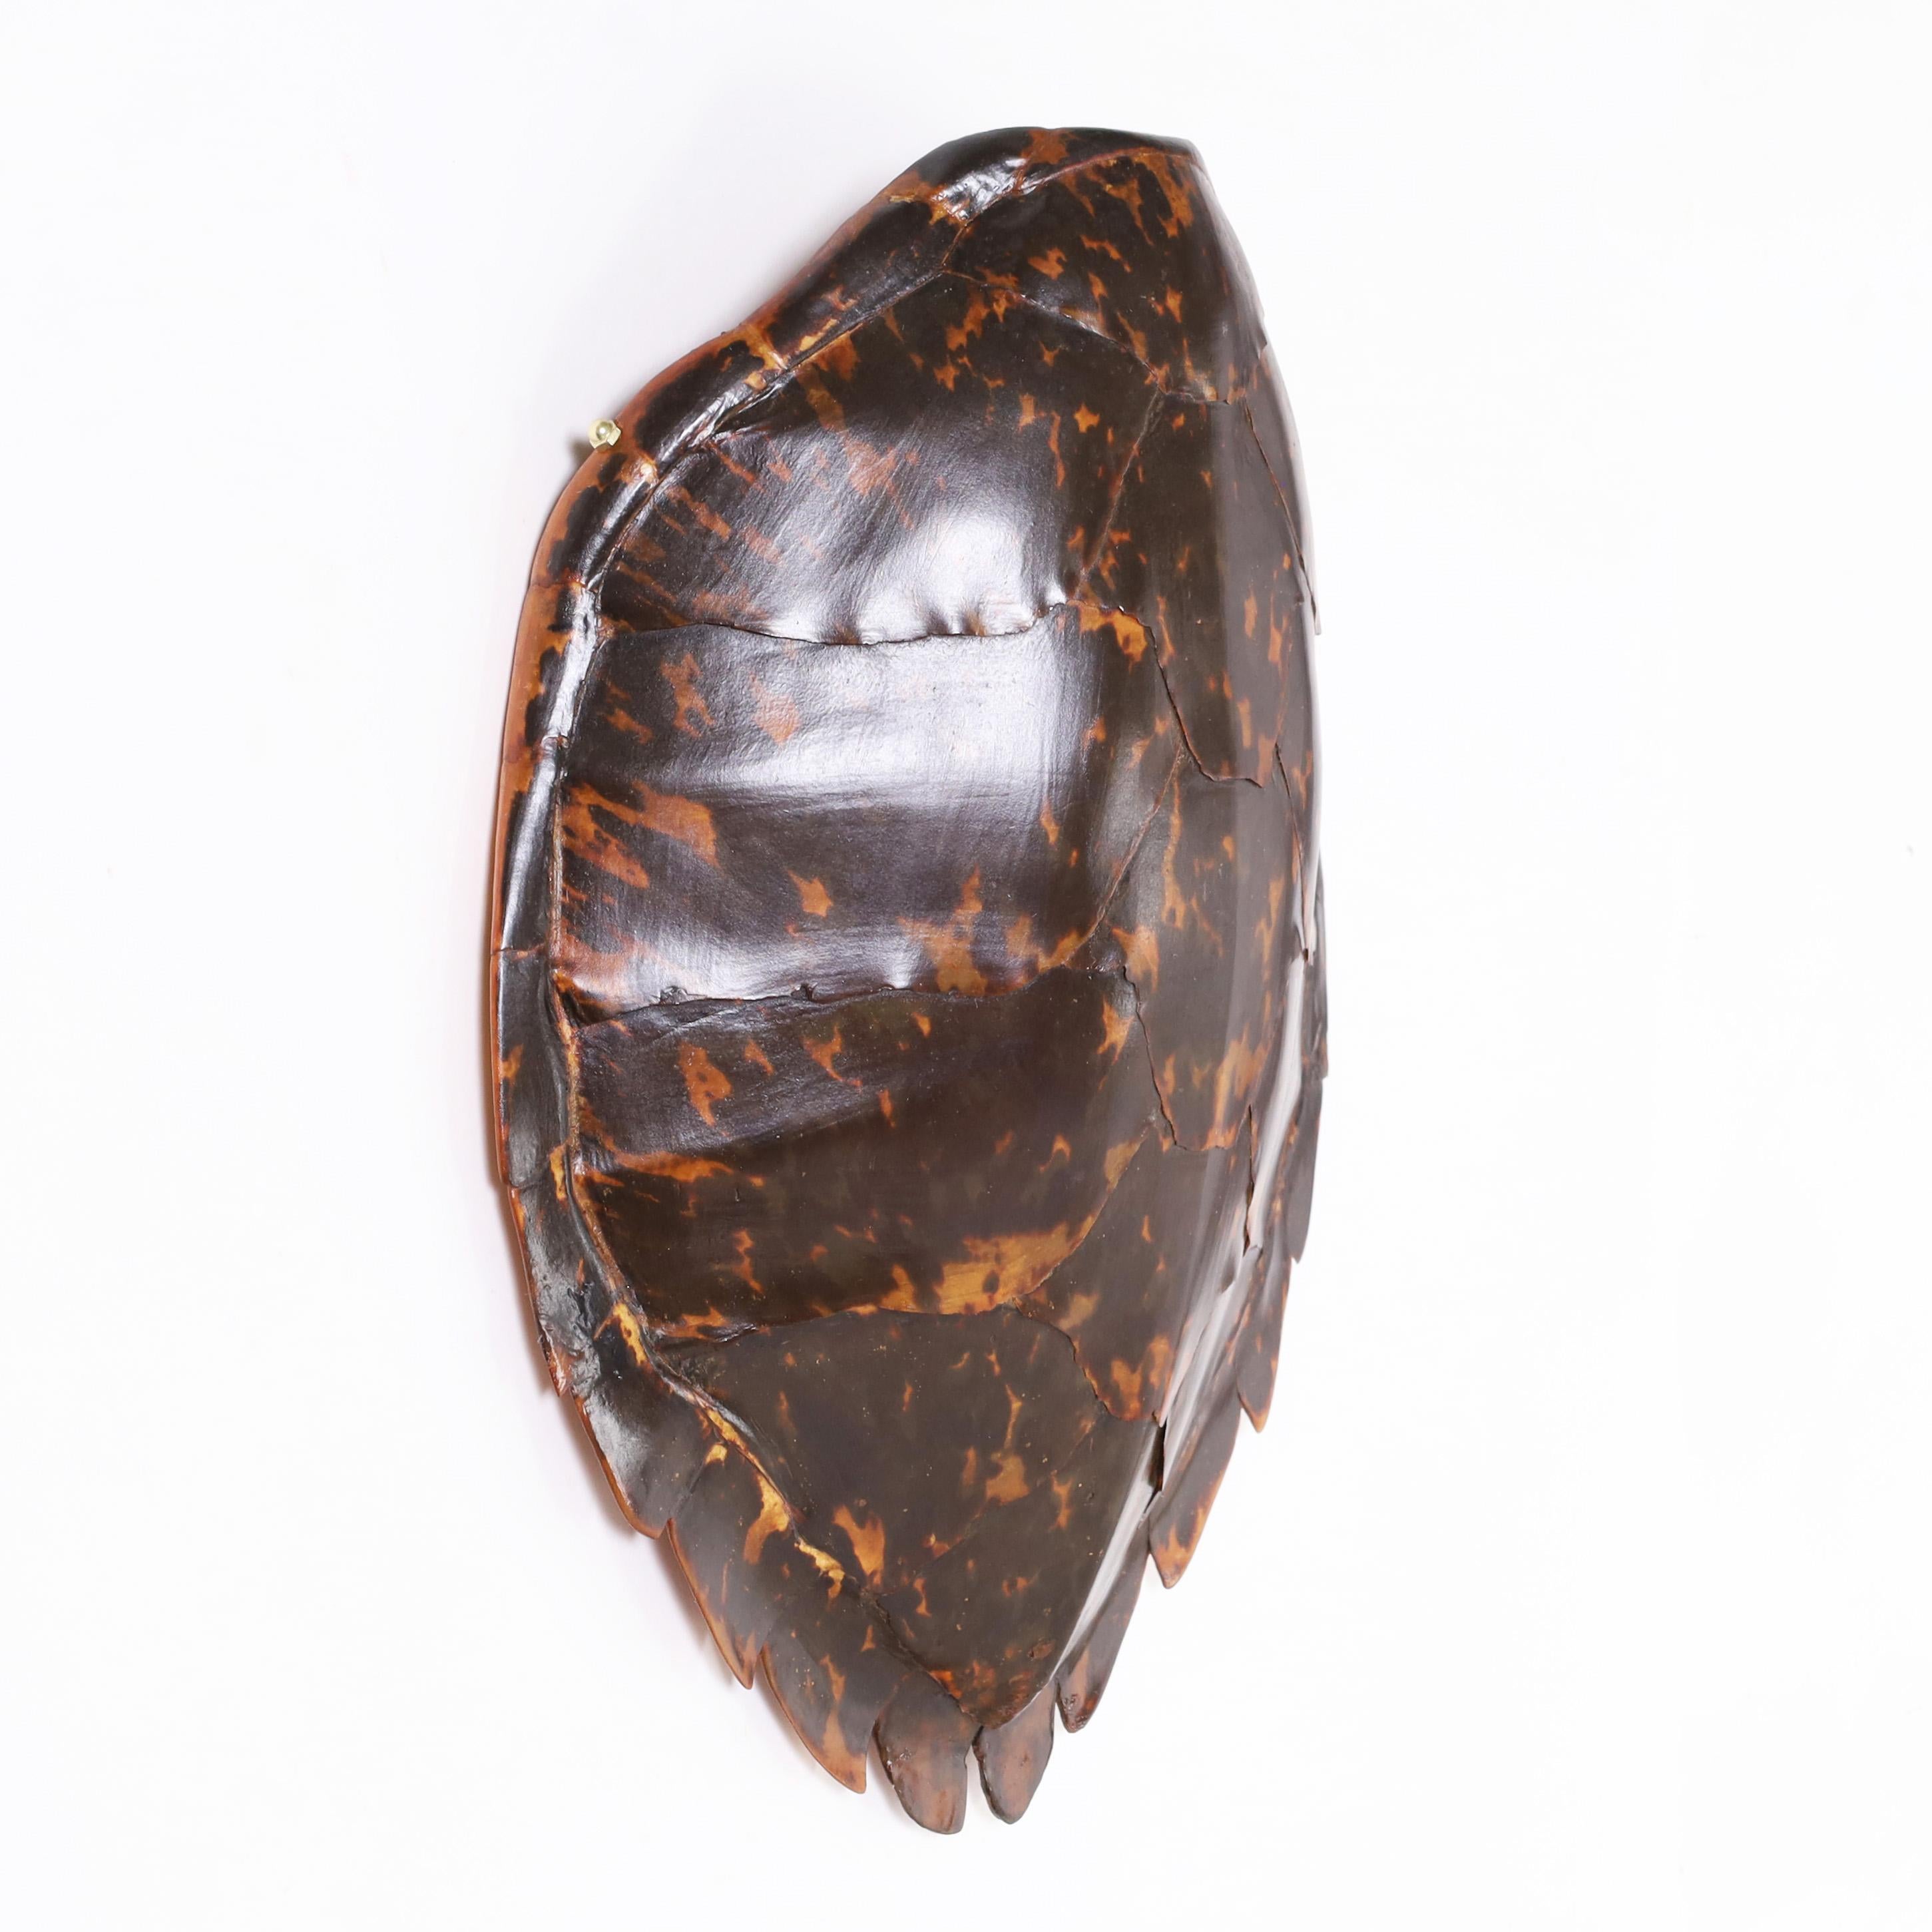 Standout antique hawksbill turtle shell with its iconic variegated color tones and sea inspired sculptural form.